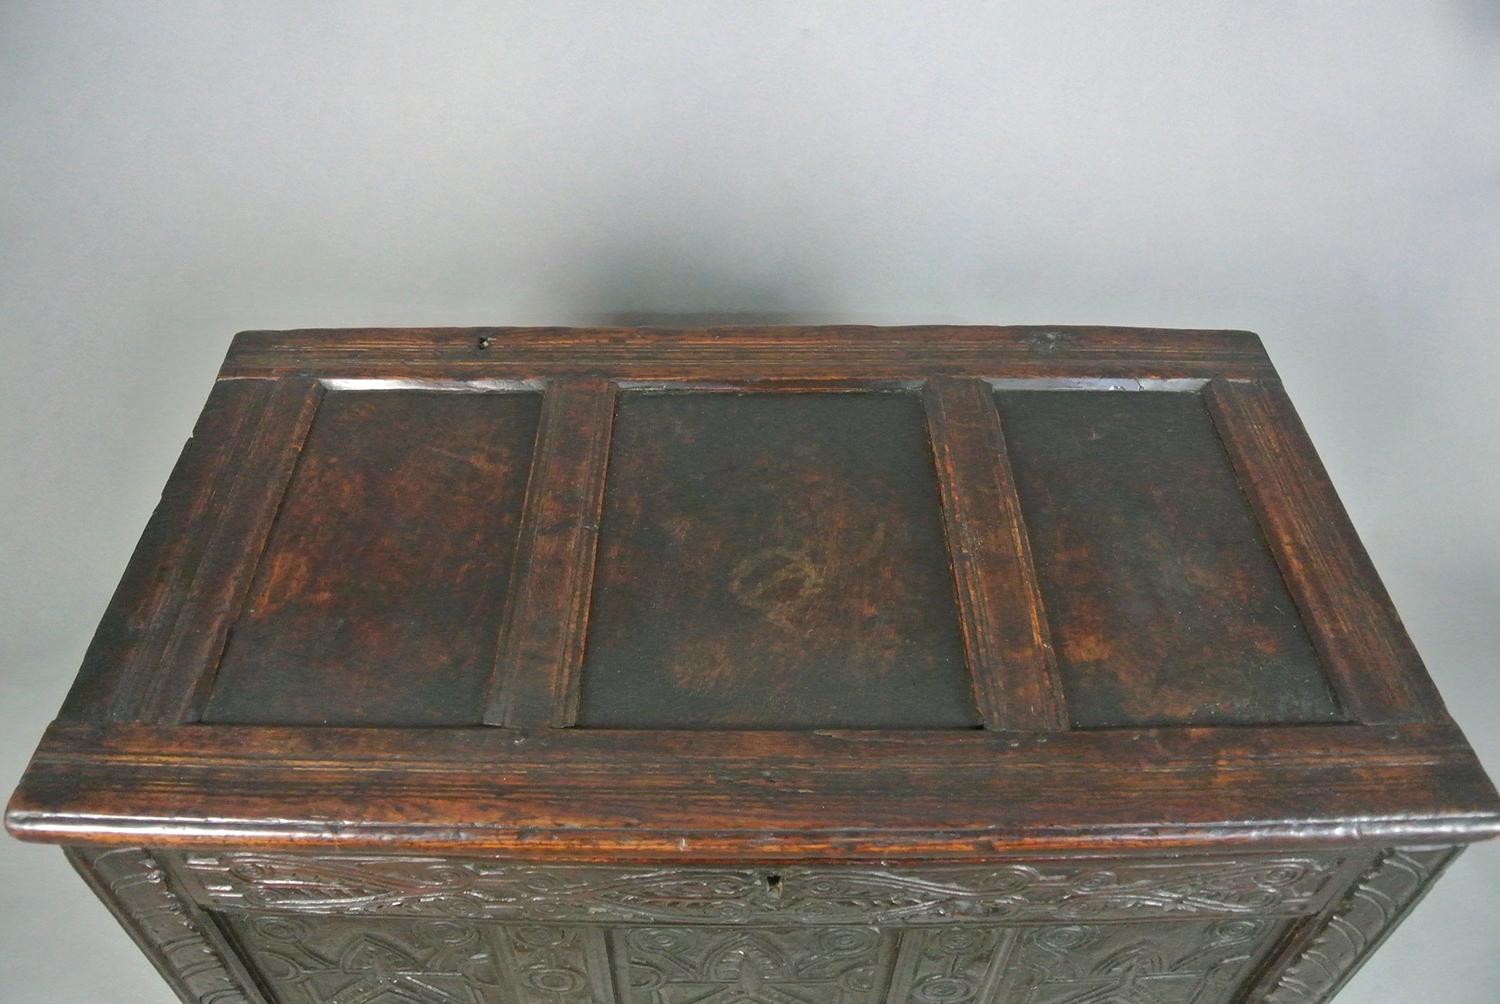 A Very Good Early English Oak Coffer c. 1600 For Sale 3